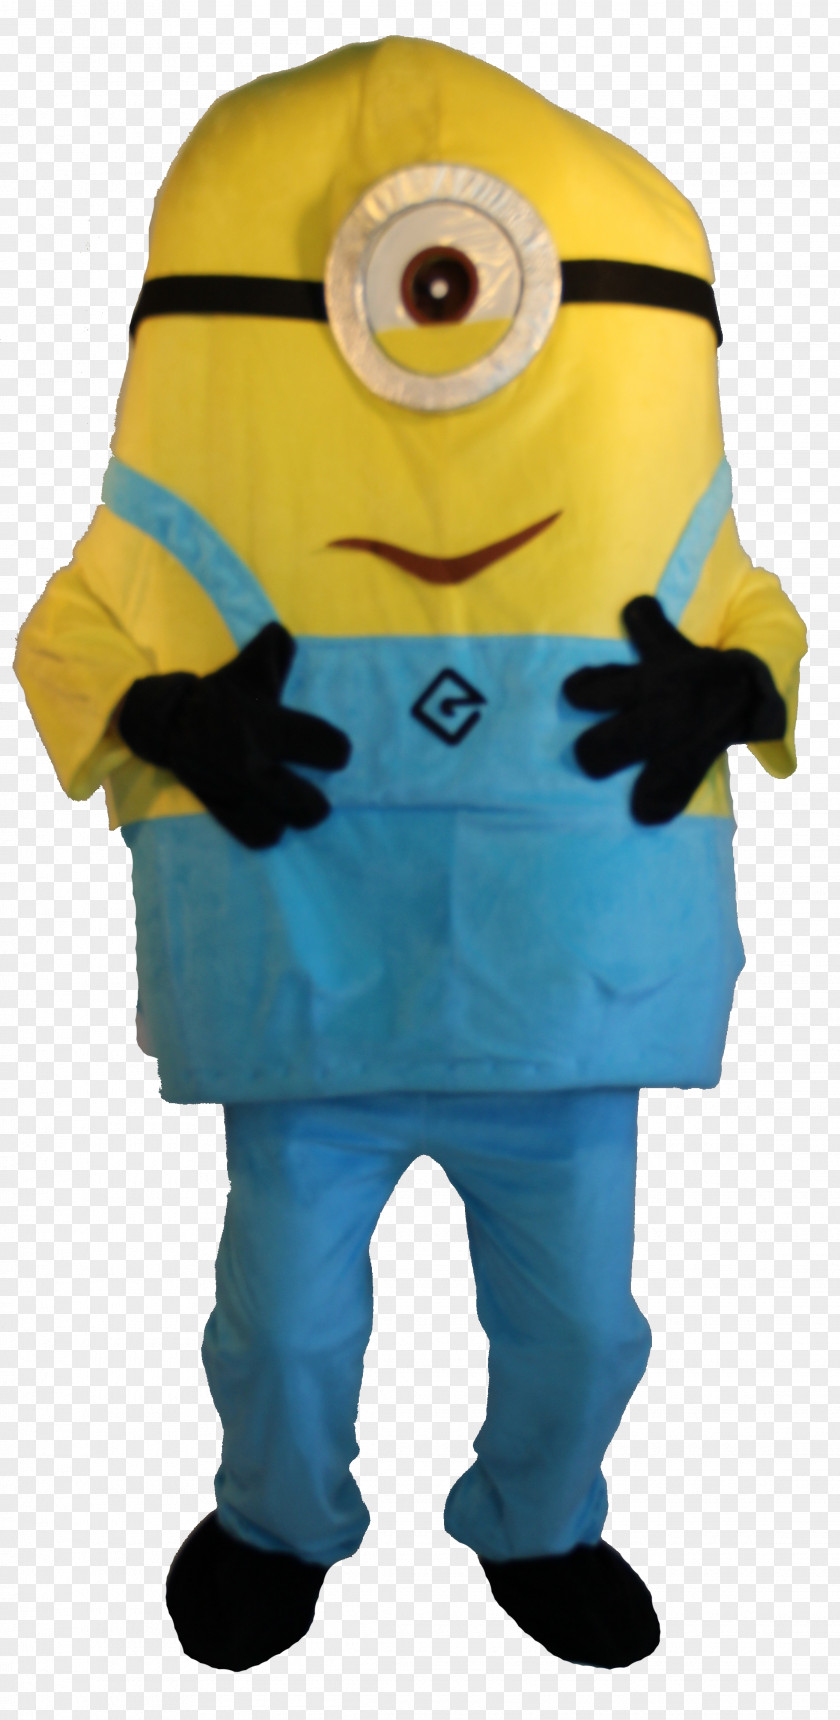 Minion Costumed Character Mascot Stuffed Animals & Cuddly Toys PNG